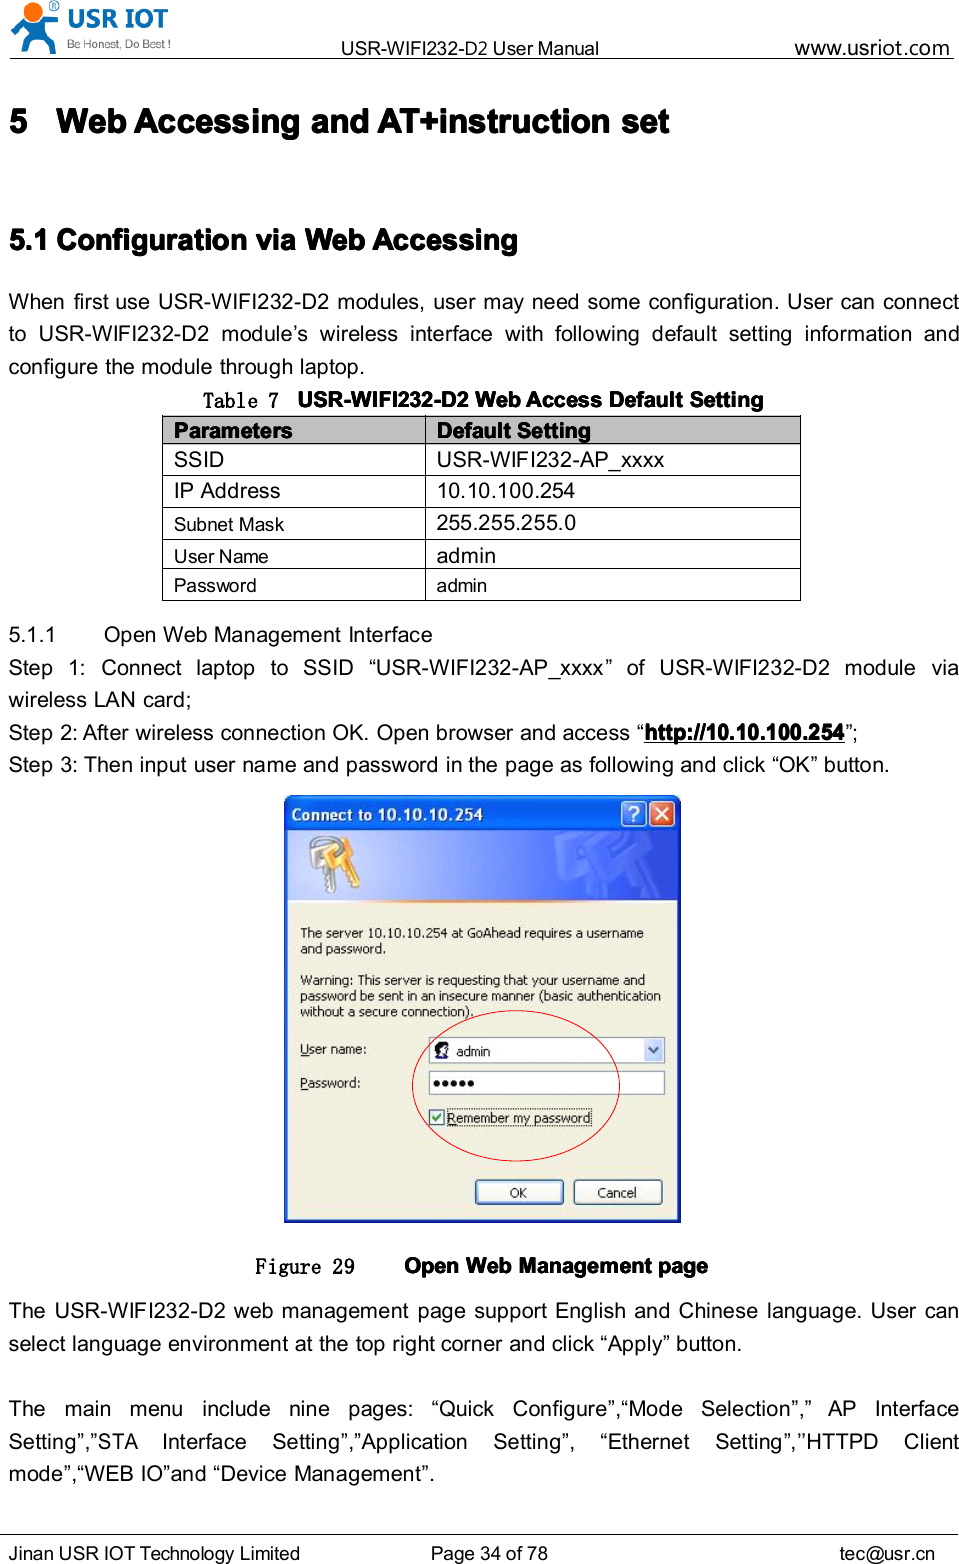 USR-WIFI232- D2 User Manual www.usr iot .comJinan USR IOT Technology Limited Page 34 of 78 tec@usr.cn5555 WebWebWebWeb AccessingAccessingAccessingAccessing andandandand AT+instructionAT+instructionAT+instructionAT+instruction setsetsetset5.15.15.15.1 ConfigurationConfigurationConfigurationConfiguration viaviaviavia WebWebWebWeb AccessingAccessingAccessingAccessingWhen first use USR-WIFI232-D2 modules, user may need some configuration. User can connectto USR-WIFI232-D2 module ’ s wireless interface with following default setting information andconfigure the module through laptop.Table 7 USR-WIFI232-D2USR-WIFI232-D2USR-WIFI232-D2USR-WIFI232-D2 WebWebWebWeb AccessAccessAccessAccess DefaultDefaultDefaultDefault SettingSettingSettingSettingParametersParametersParametersParameters DefaultDefaultDefaultDefault SettingSettingSettingSettingSSID USR-WIFI232-A P_xxxxIP Address 10.10.10 0 .254Subnet Mask255.255.255.0User NameadminPassword admin5.1.1 Open Web Management InterfaceStep 1: Connect laptop to SSID “ USR-WIFI232-AP_xxxx ” of USR-WIFI232-D2 module viawireless LAN card;Step 2: After wireless connection OK. Open browser and access “ http://10.10.100.254http://10.10.100.254http://10.10.100.254http://10.10.100.254 ” ;Step 3: Then input user name and password in the page as following and click “ OK ” button.Figure 29 OpenOpenOpenOpen WebWebWebWeb ManagementManagementManagementManagement pagepagepagepageThe USR-WIFI232-D2 web management page support English and Chinese language. User canselect language environment at the top right corner and click “ Apply ” button.The main menu include nine pages: “ Quick Configure ” , “ Mode Selection ” , ” AP InterfaceSetting ” , ”STAInterface Setting ” , ” Application Setting ” , “ Ethernet Setting ” , ’’ HTTPD Clientm ode ” , “ WEB IO ” and “ Device Management ” .